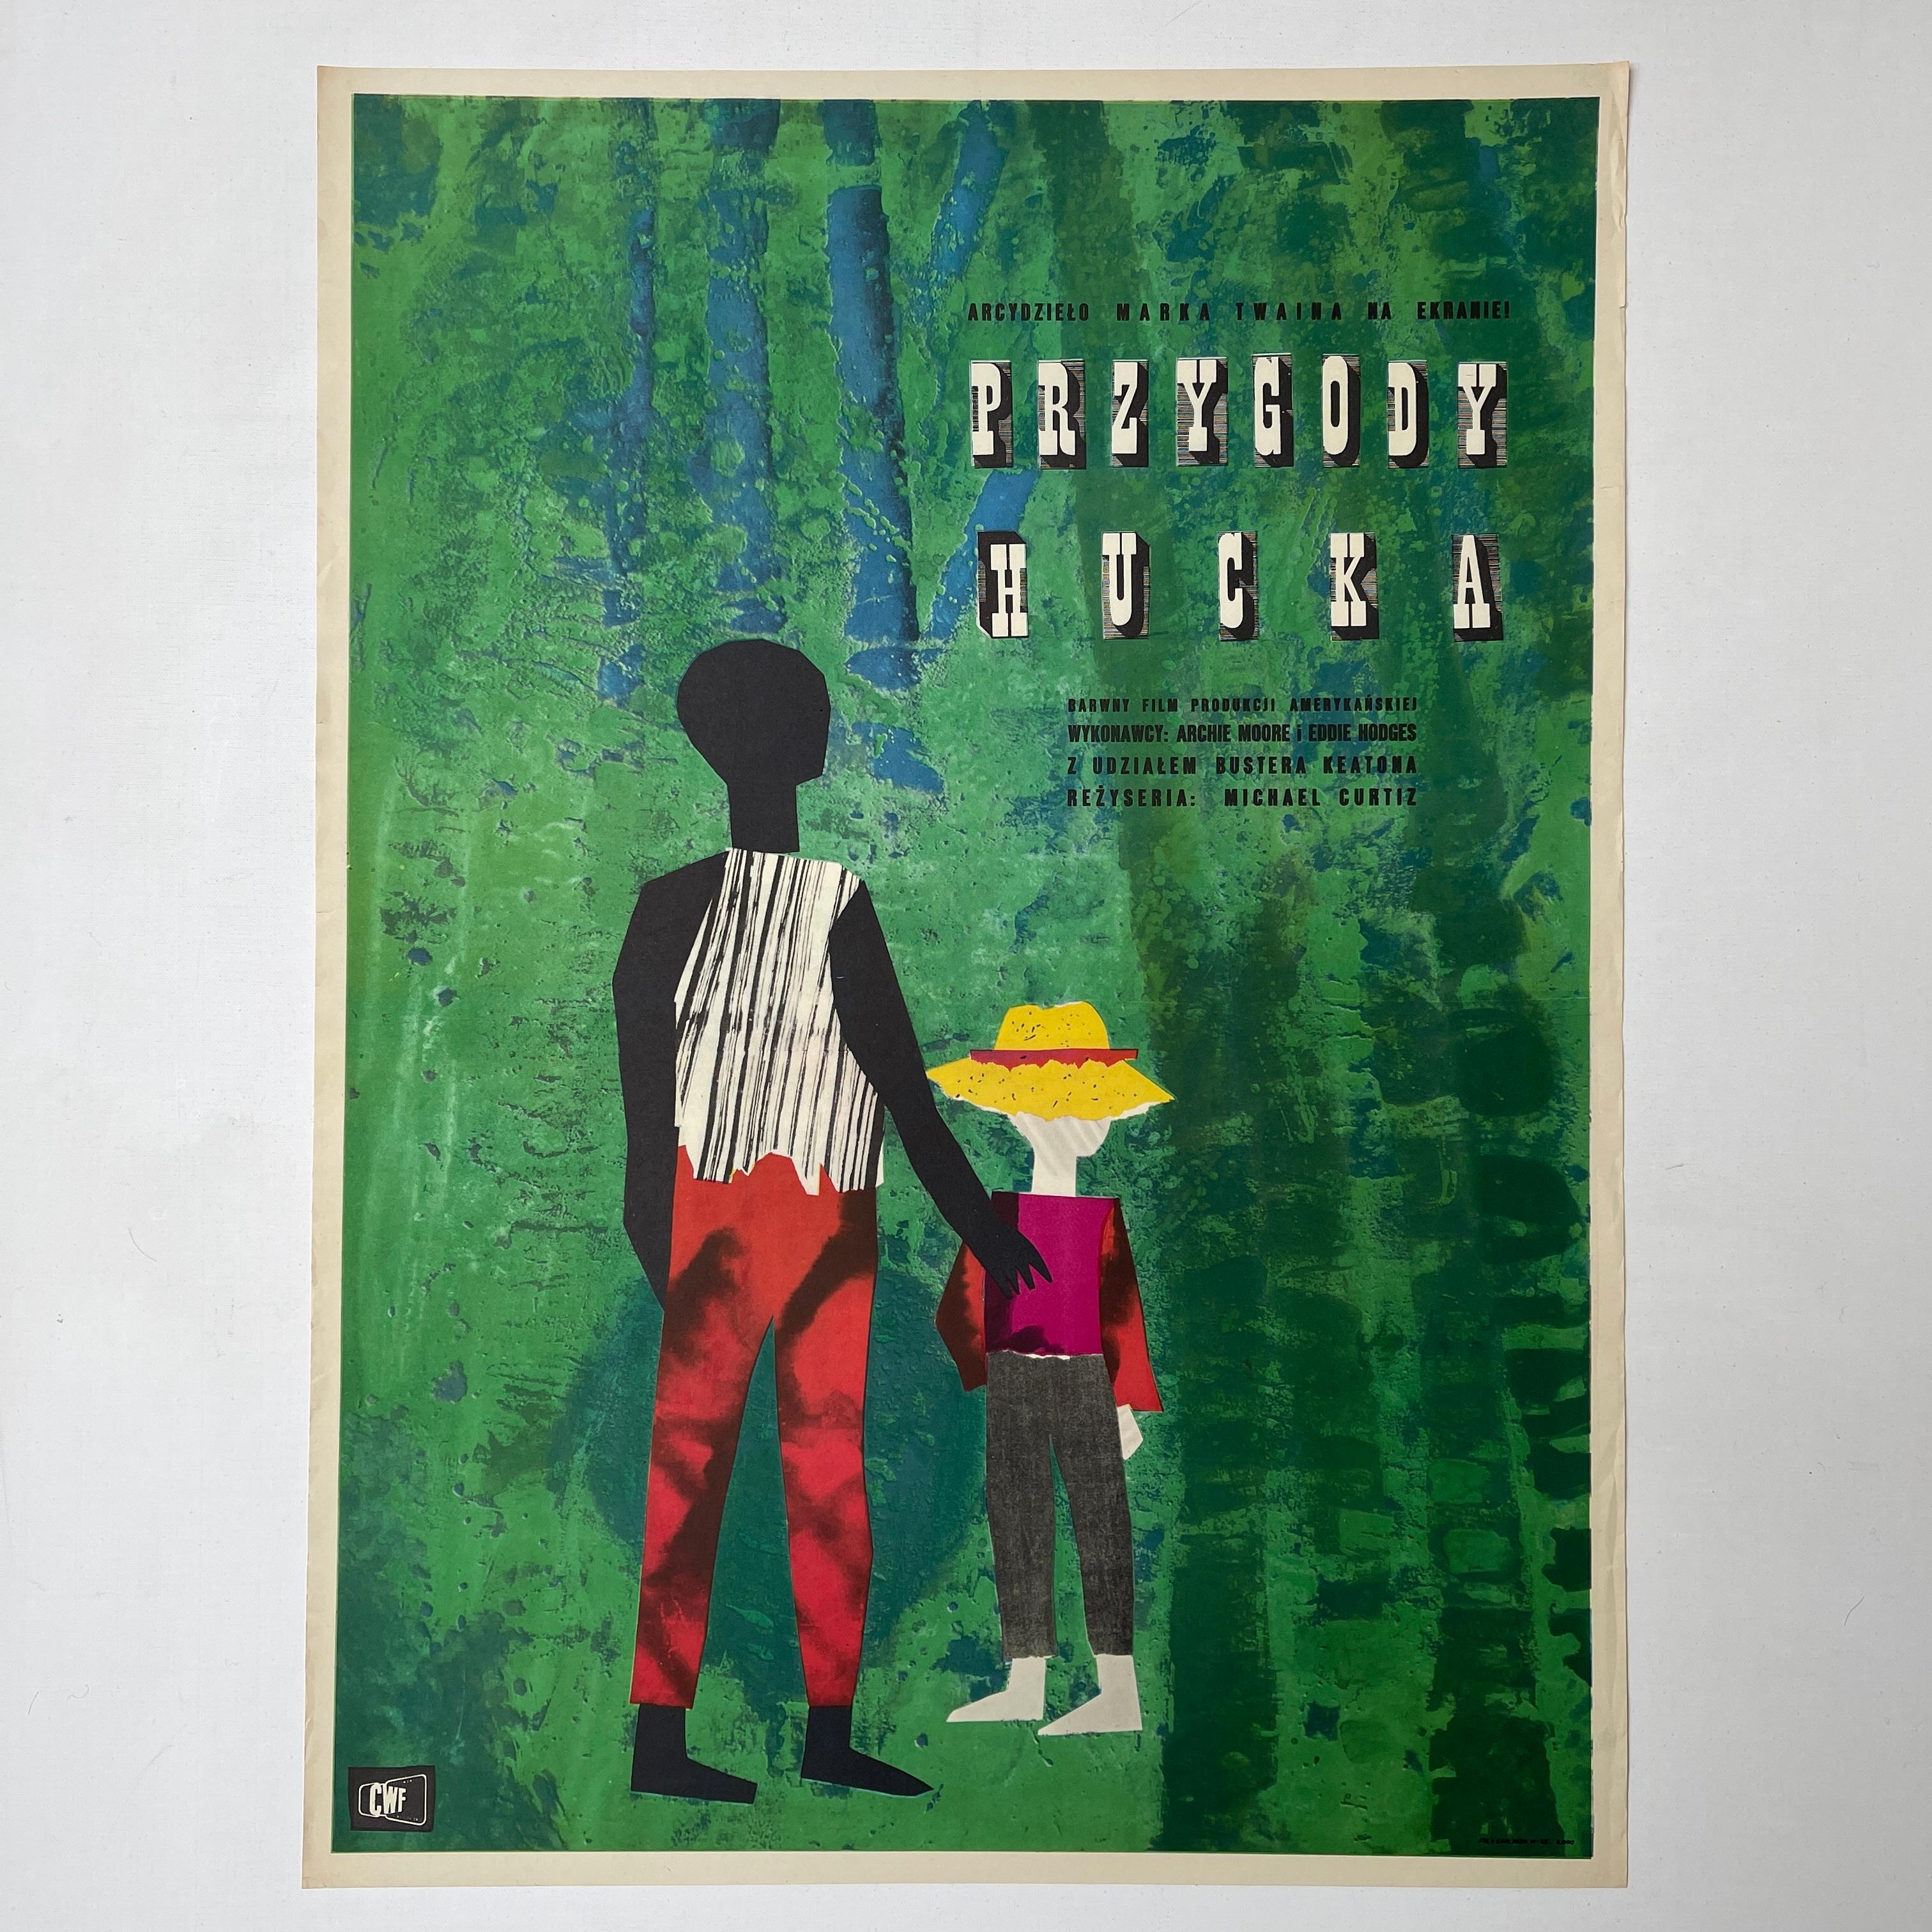 This incredibly beautiful and tender film poster was designed for the children’s classic 'The Adventures of Huckleberry Finn' (Przygody Huck) by legendary Polish illustrator Jerzy Srokowski in 1962.

The film was based on the 1884 novel by author